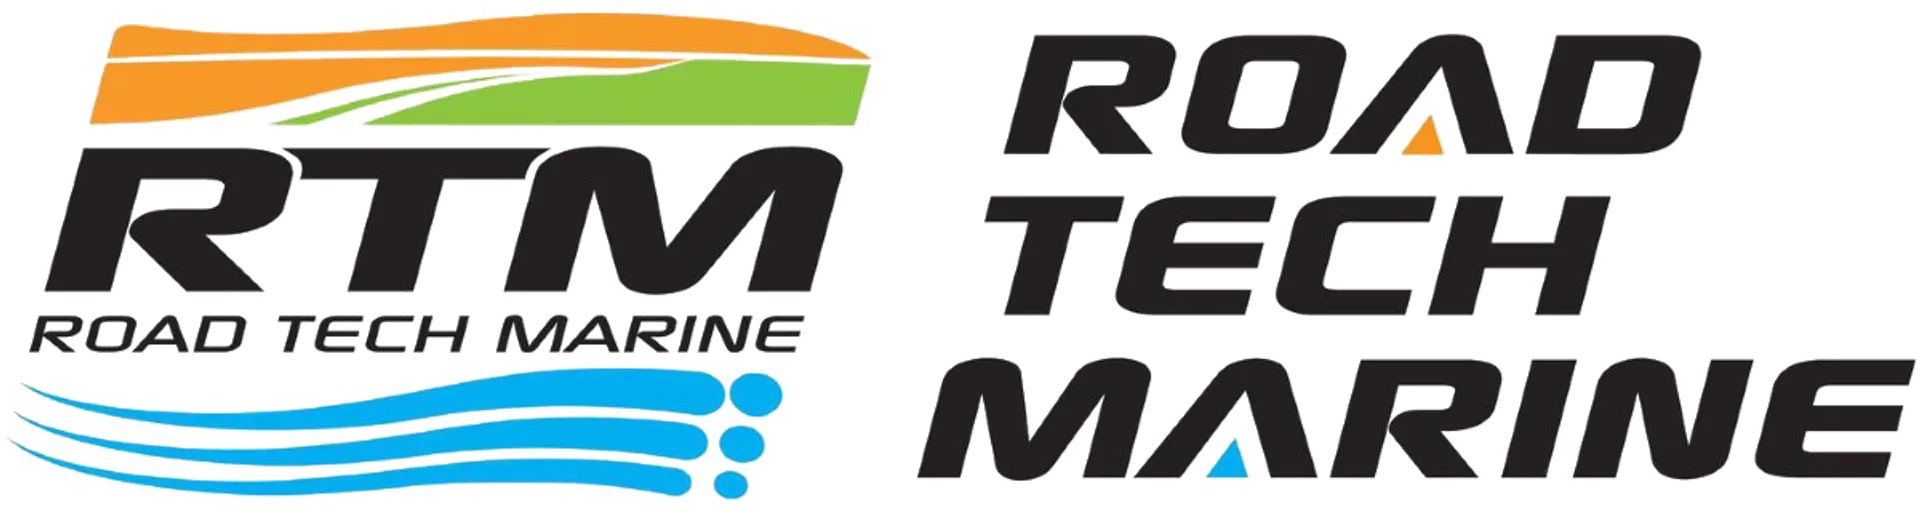 ROAD TECH MARINE logo of current flyer